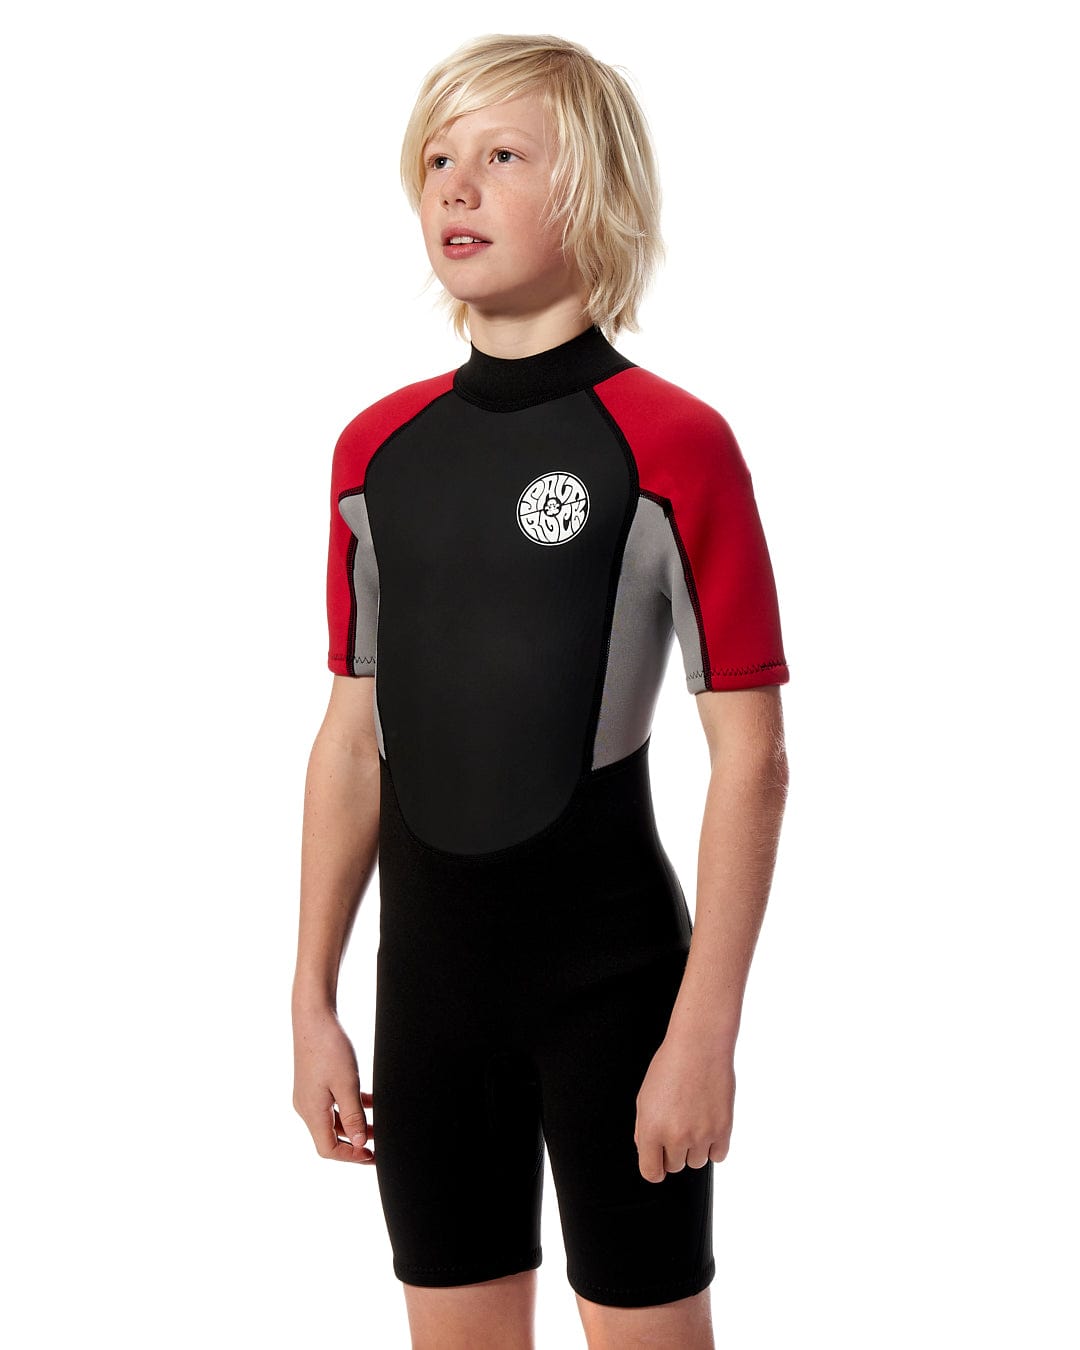 A young boy in a Saltrock Core - Boys 3/2 Shortie Wetsuit in Red stands in front of a white background.